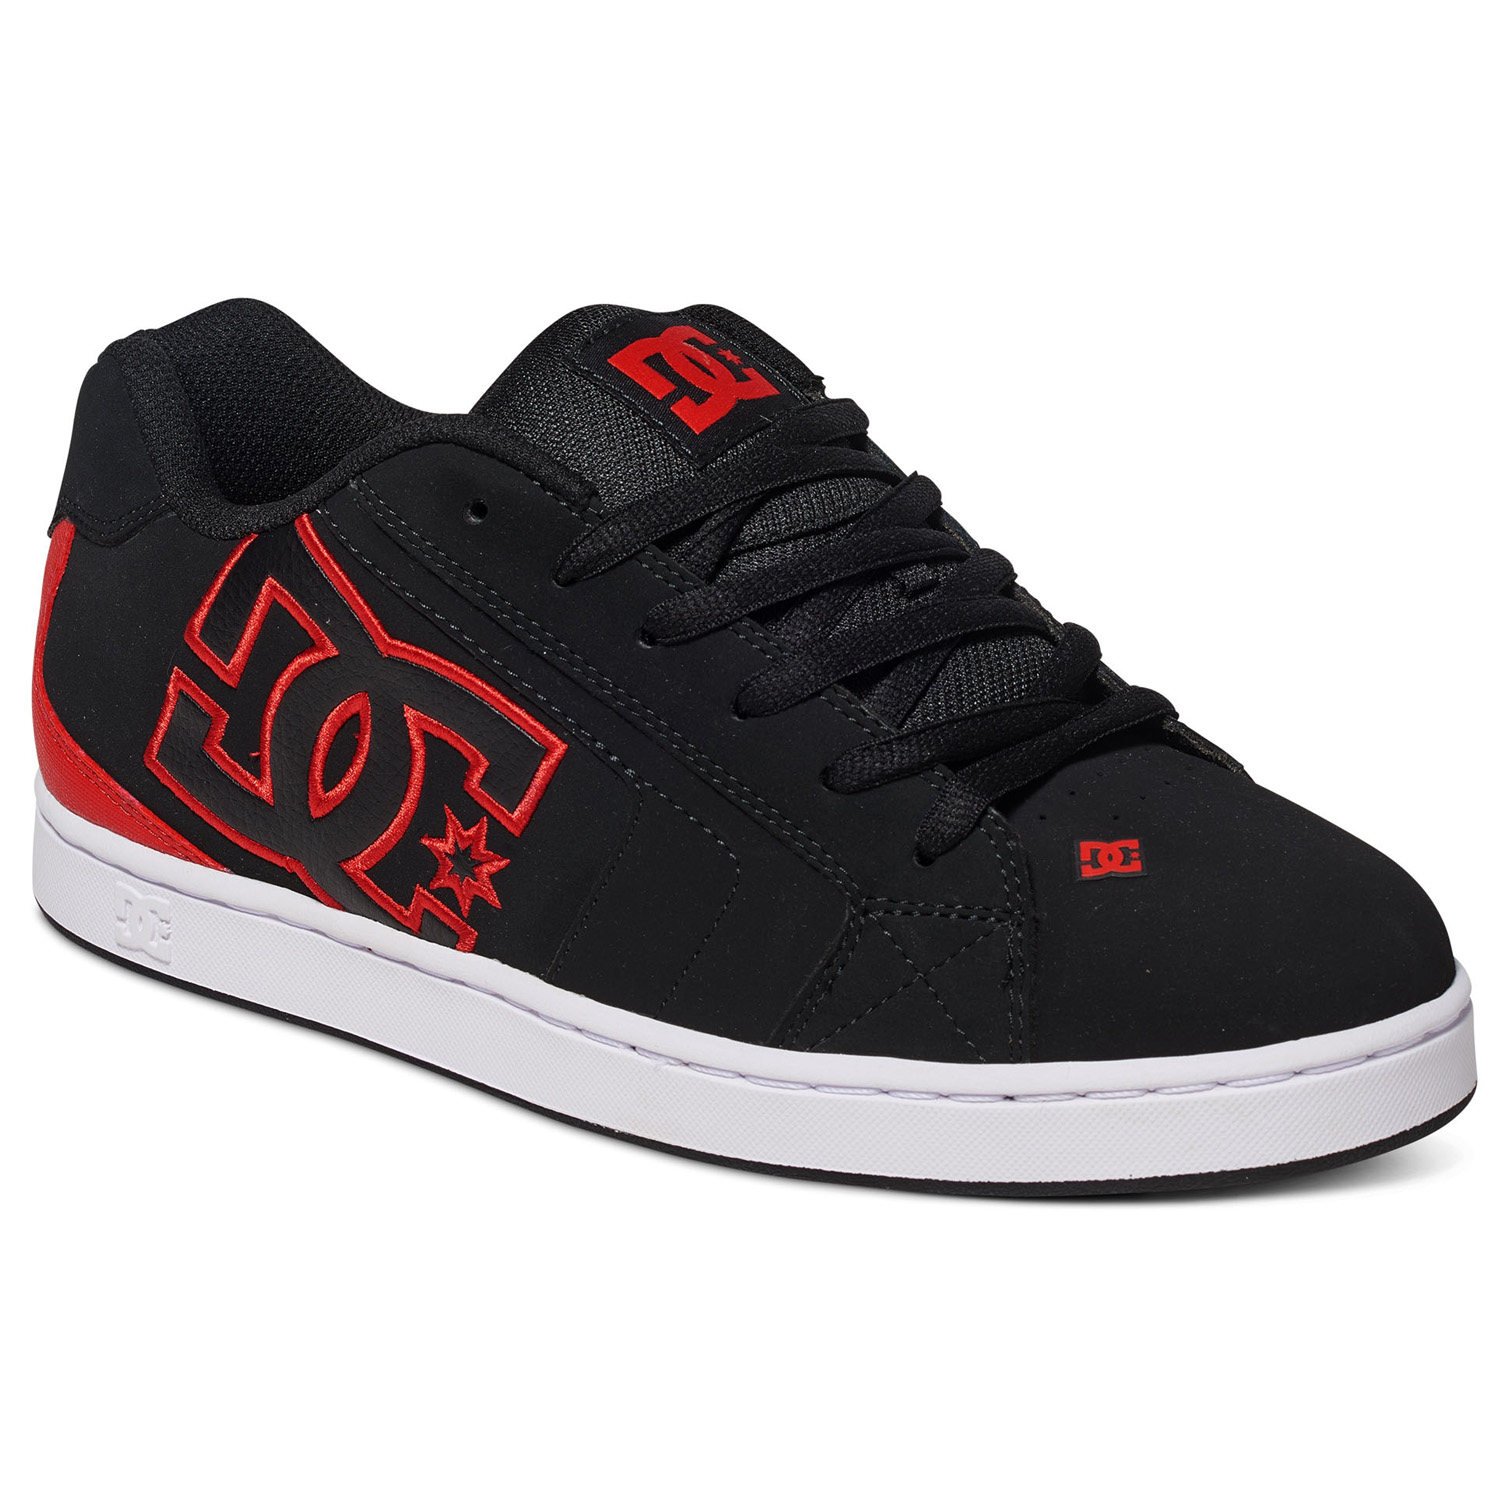 DC Chaussures Net Black/Red